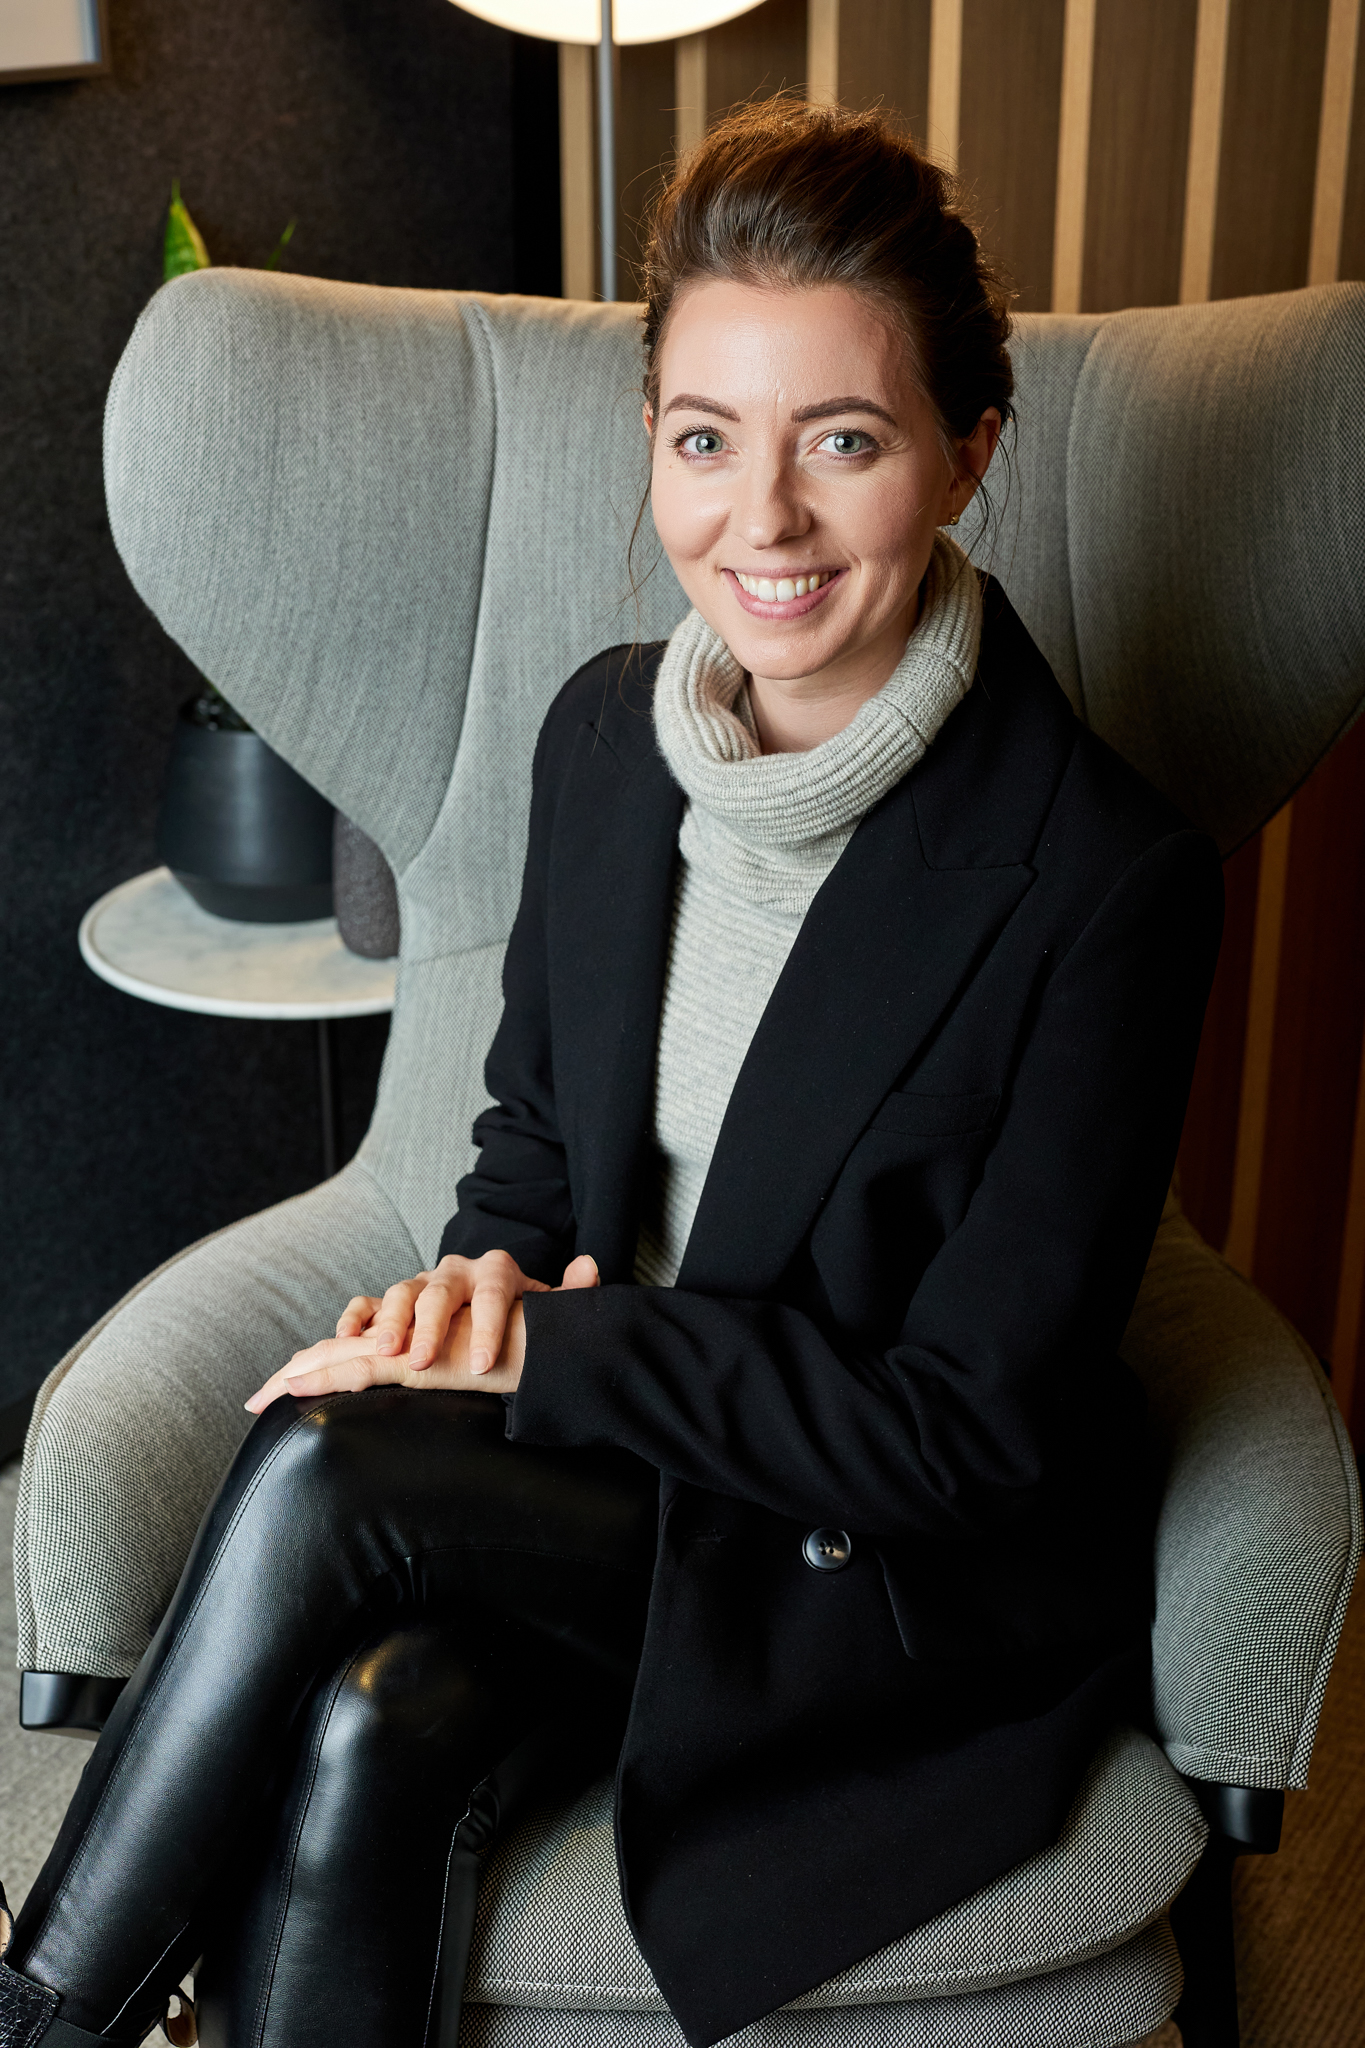 An elegantly dressed woman sitting on a chair, captured through event photography.